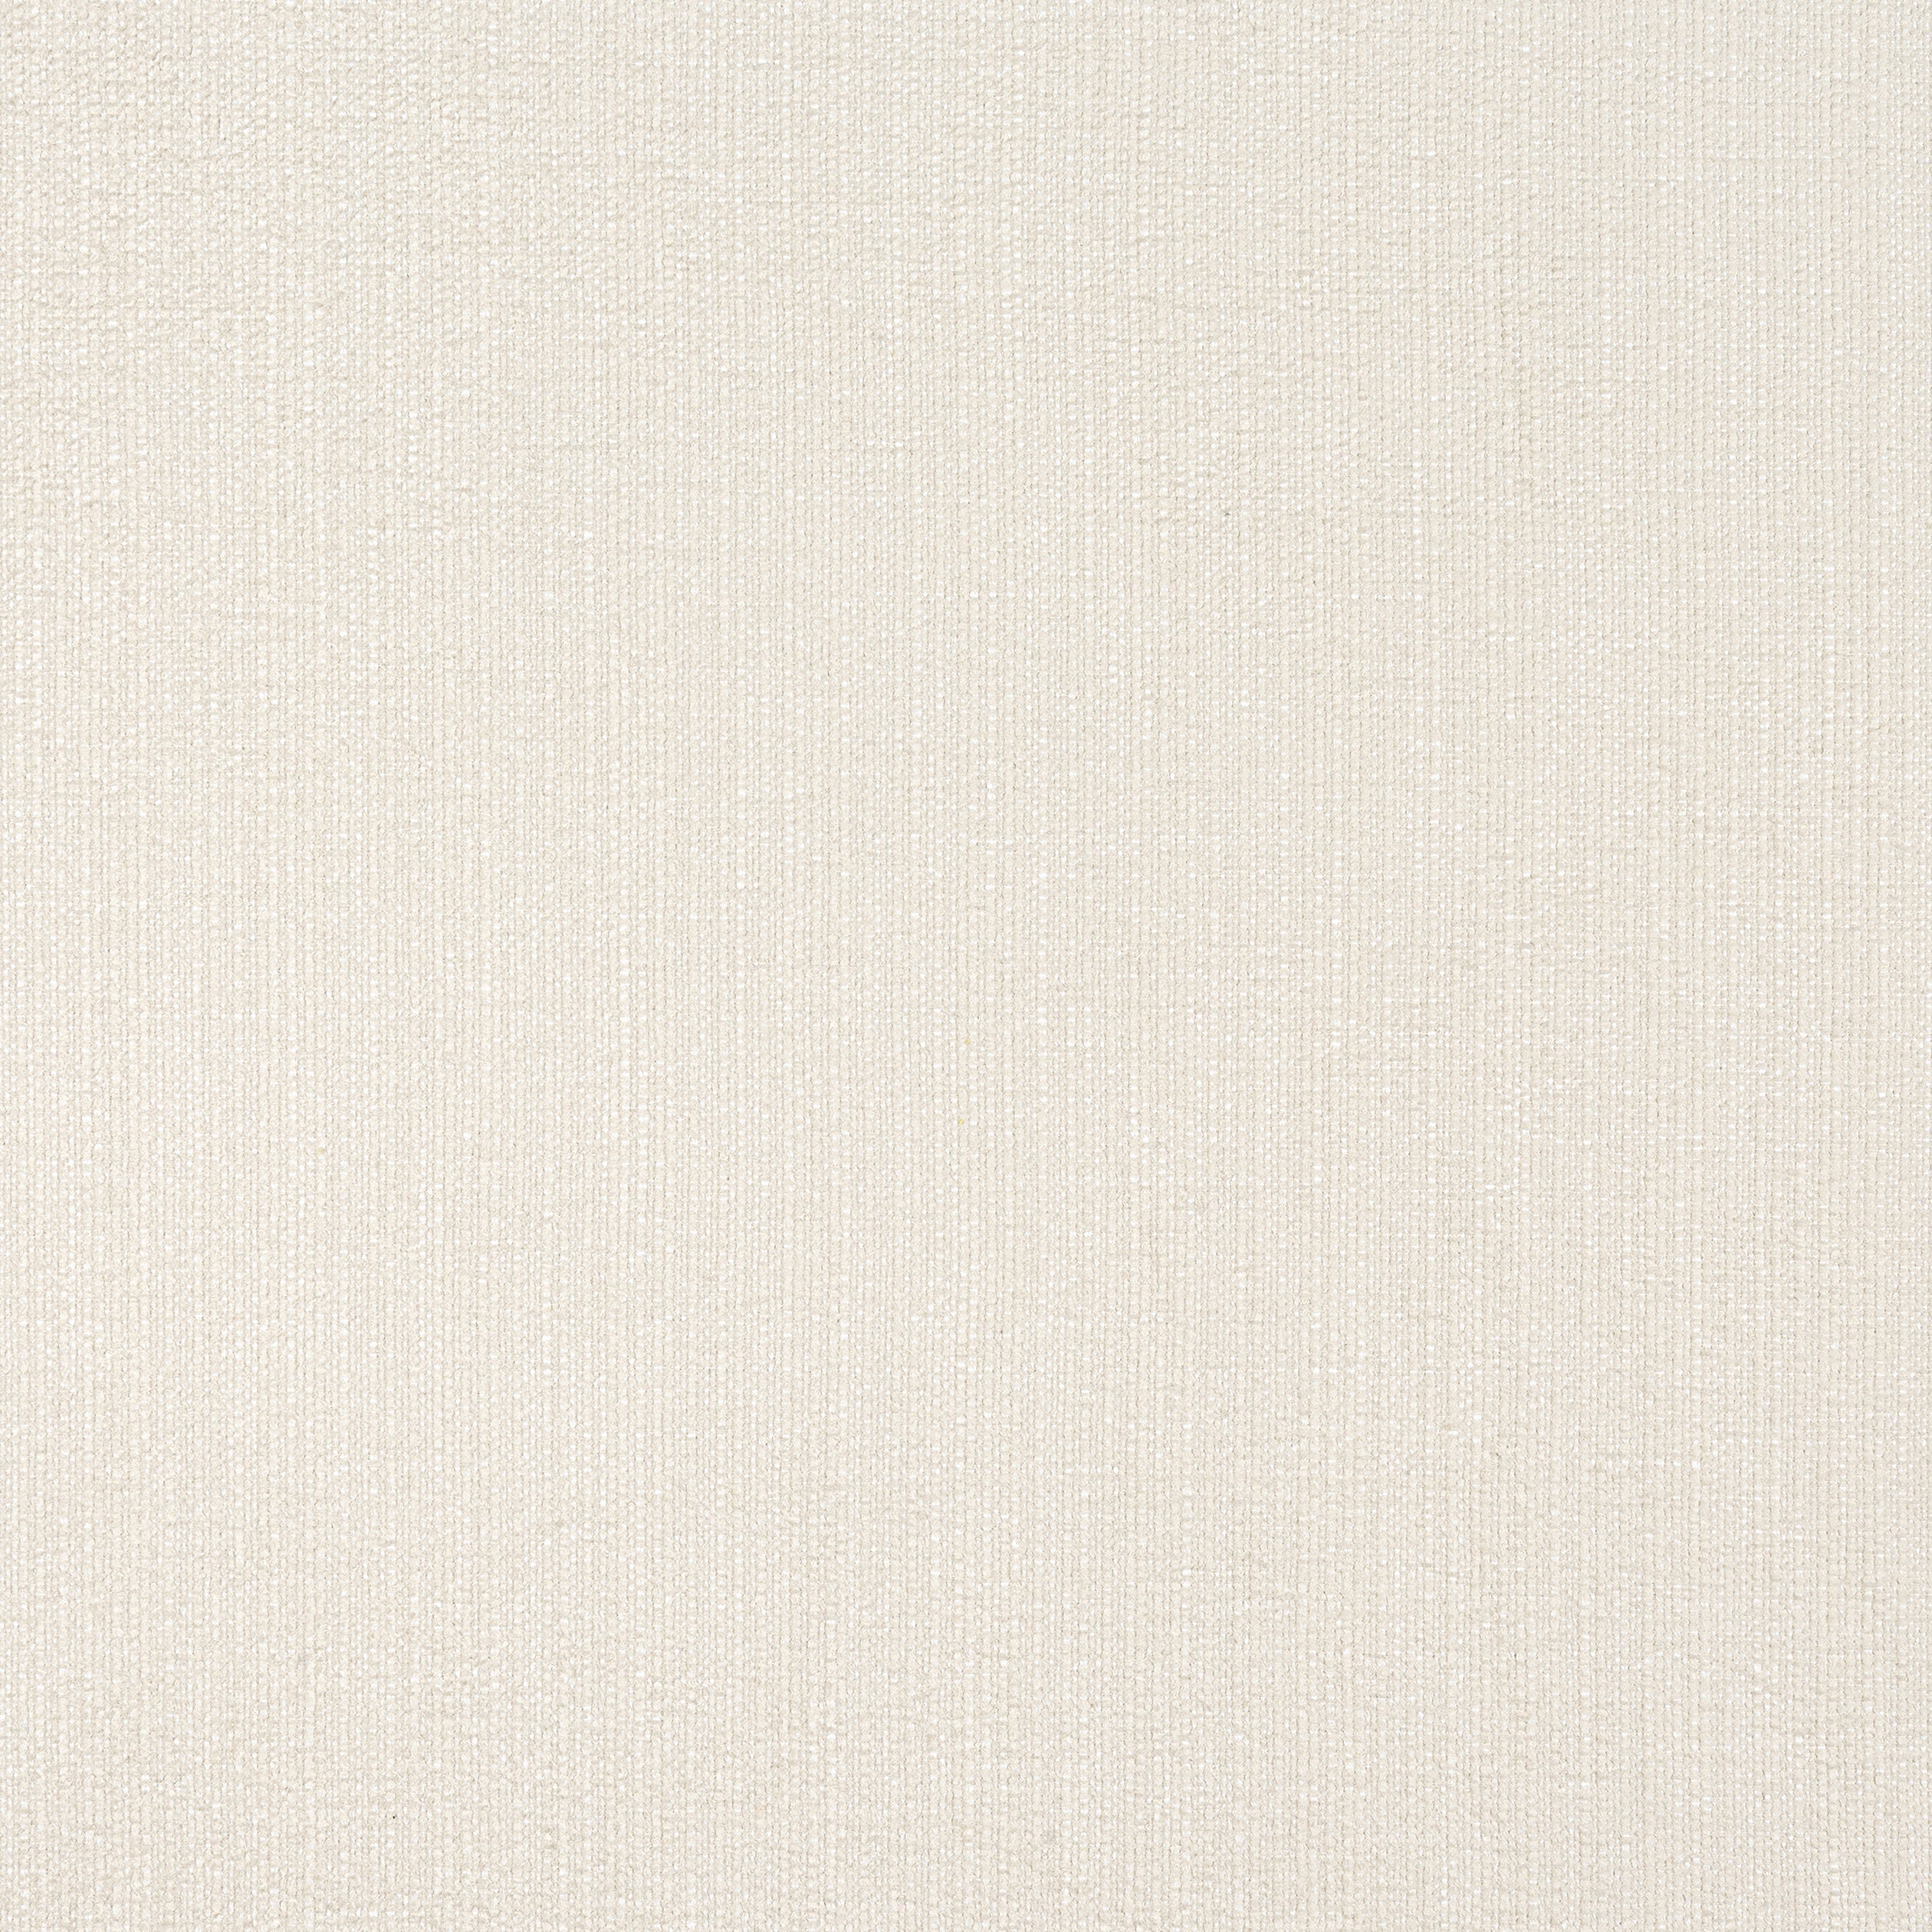 Veda fabric in flax color - pattern number W8709 - by Thibaut in the Haven Textures collection